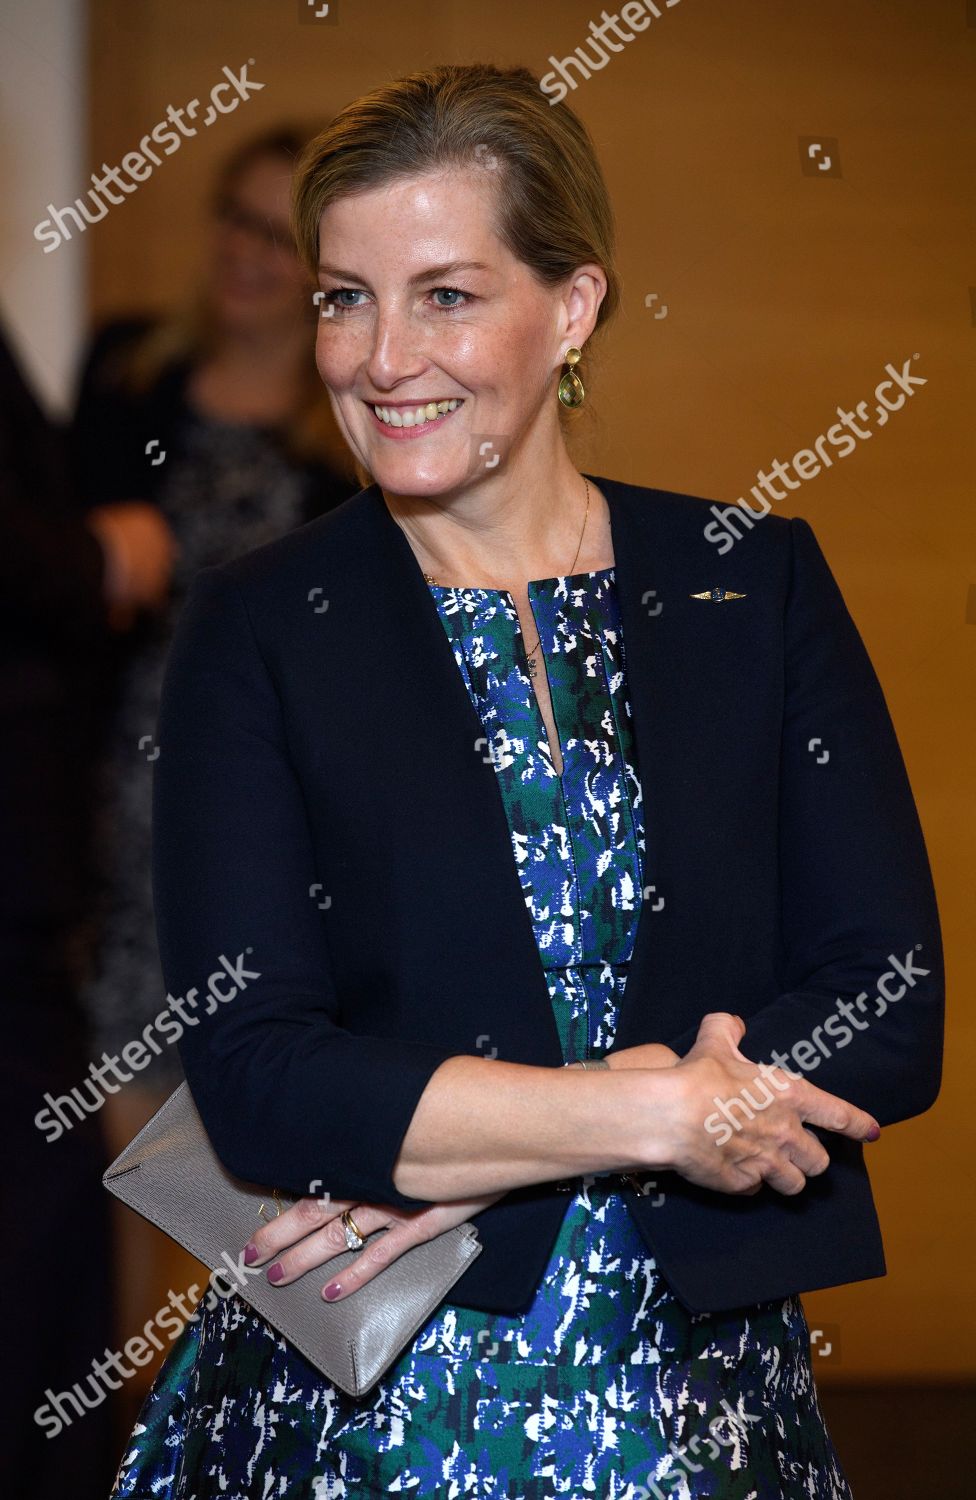 sophie-countess-of-wessex-visit-to-qatar-shutterstock-editorial-9236778p.jpg